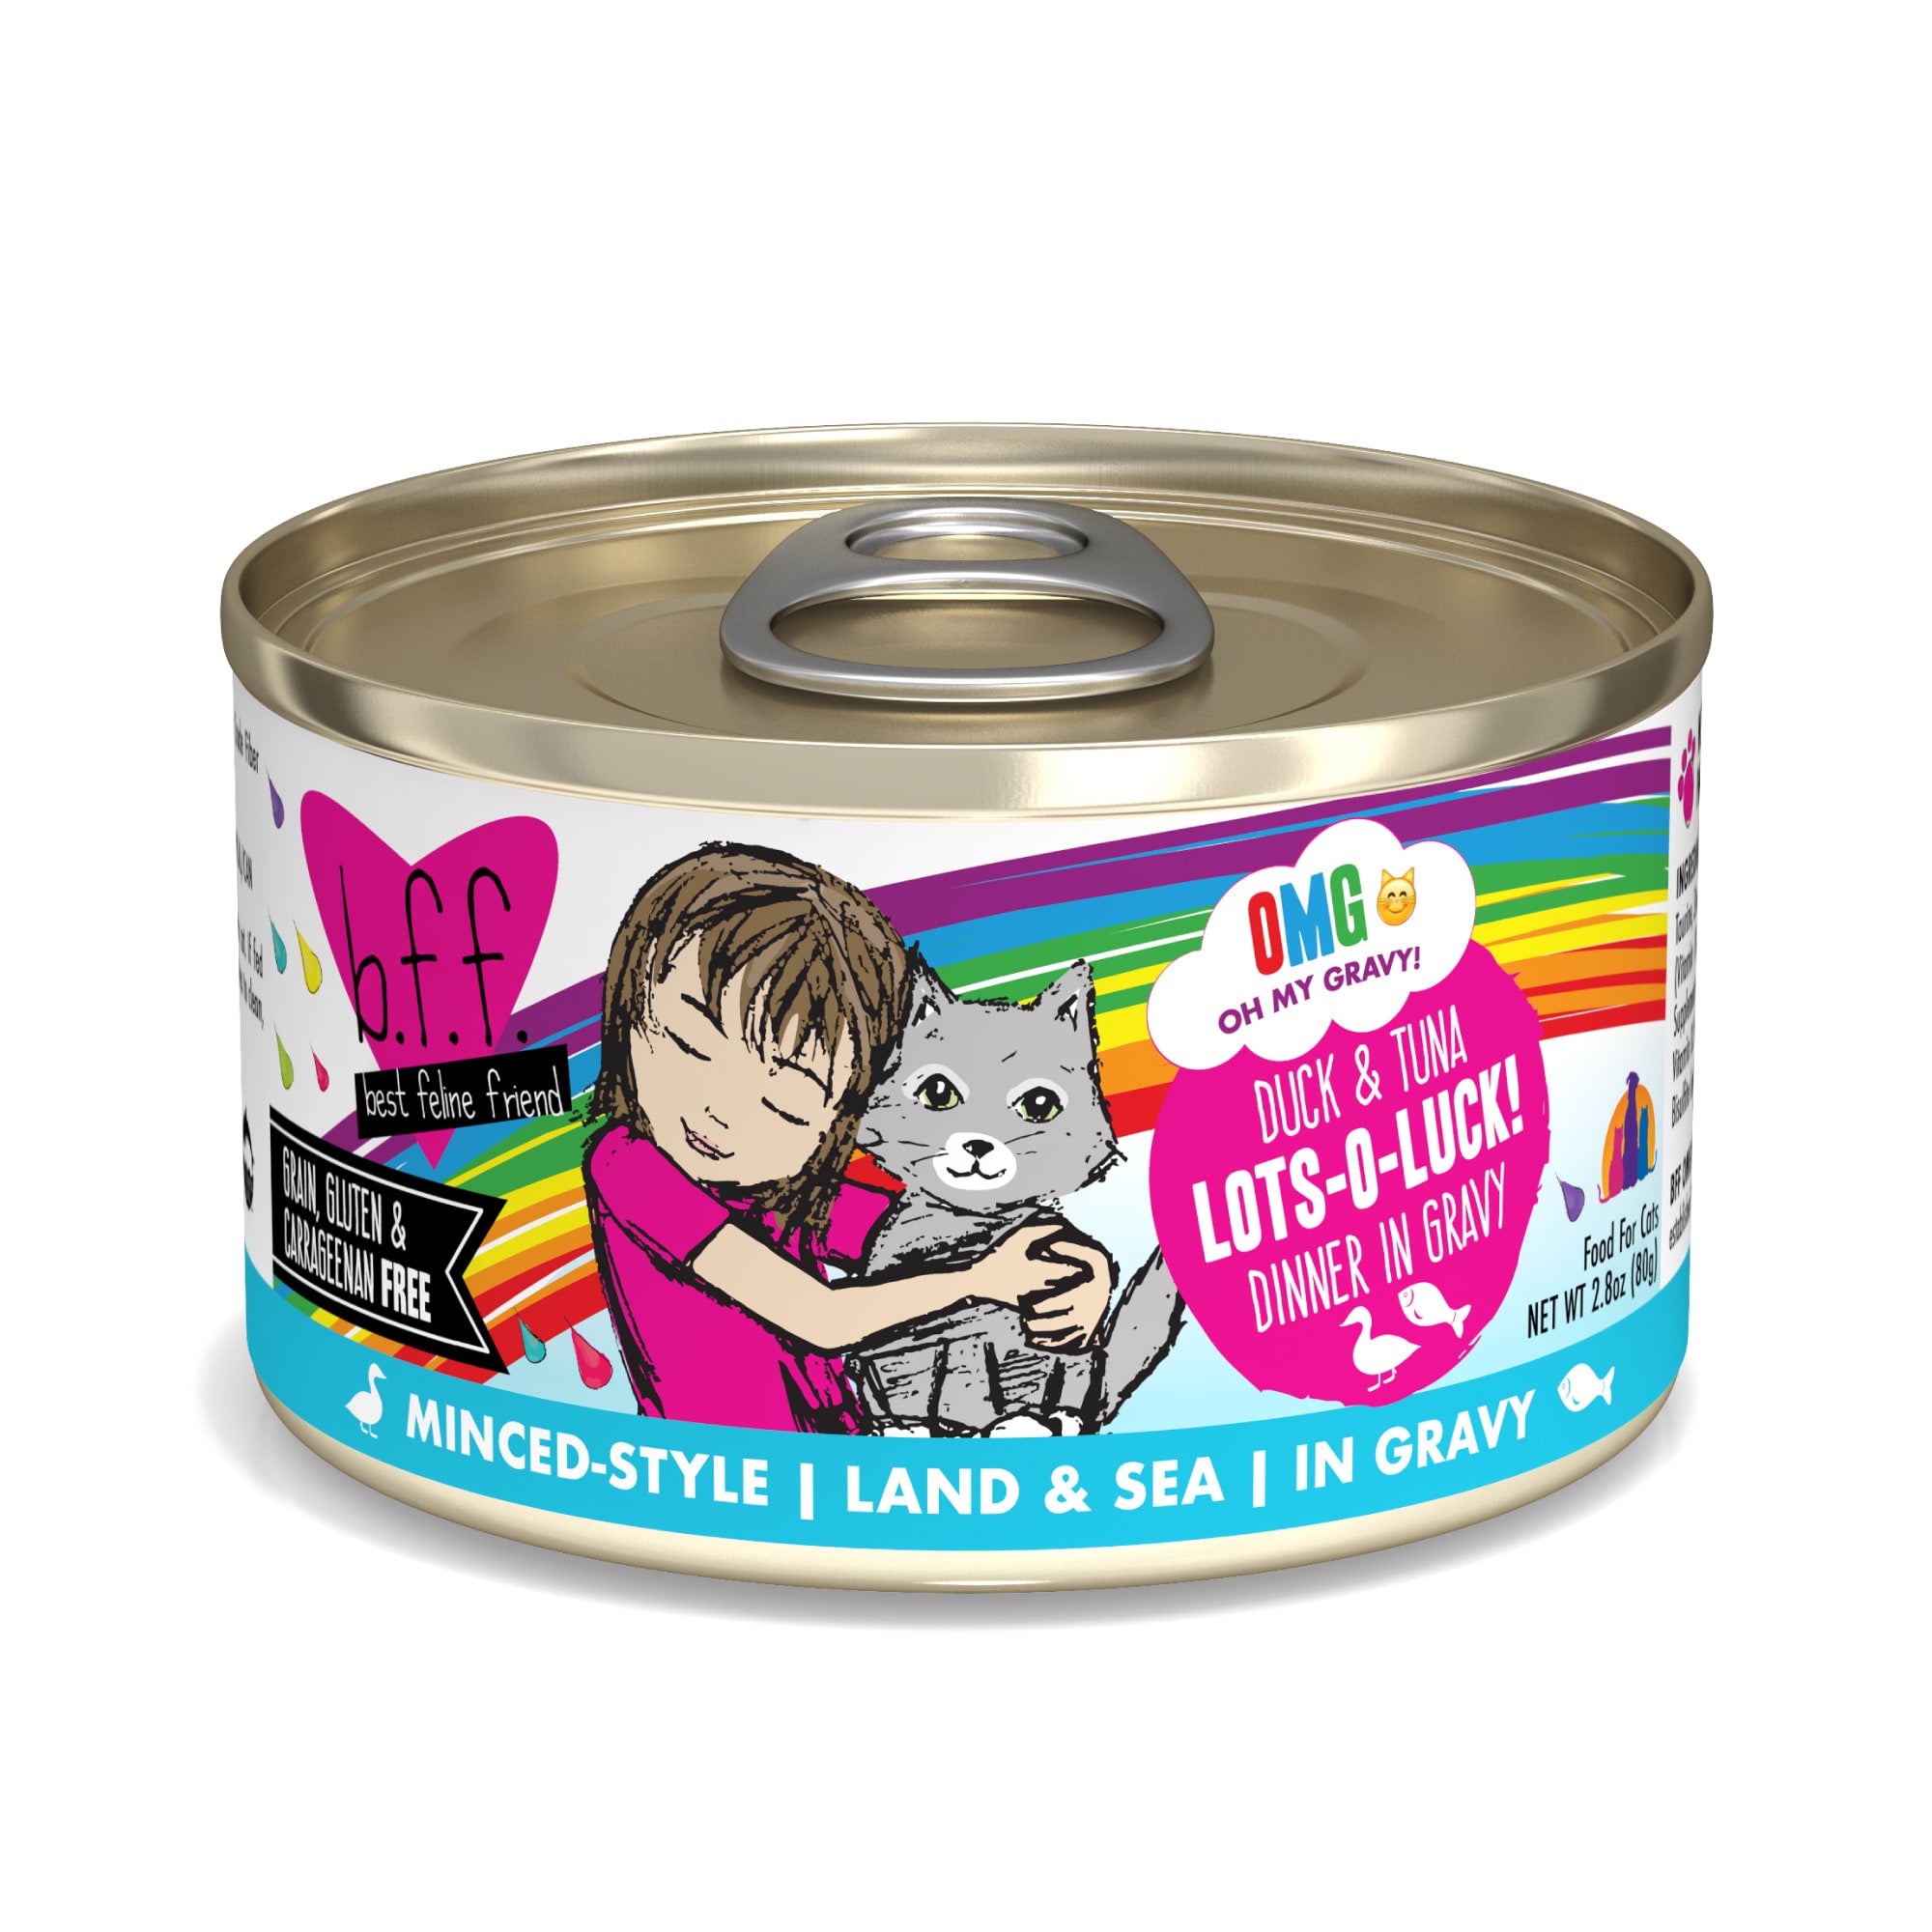 BFF OMG Best Day Eva! Beef & Salmon Dinner in Gravy Canned Cat Food 2.8 oz - Mutts & Co.